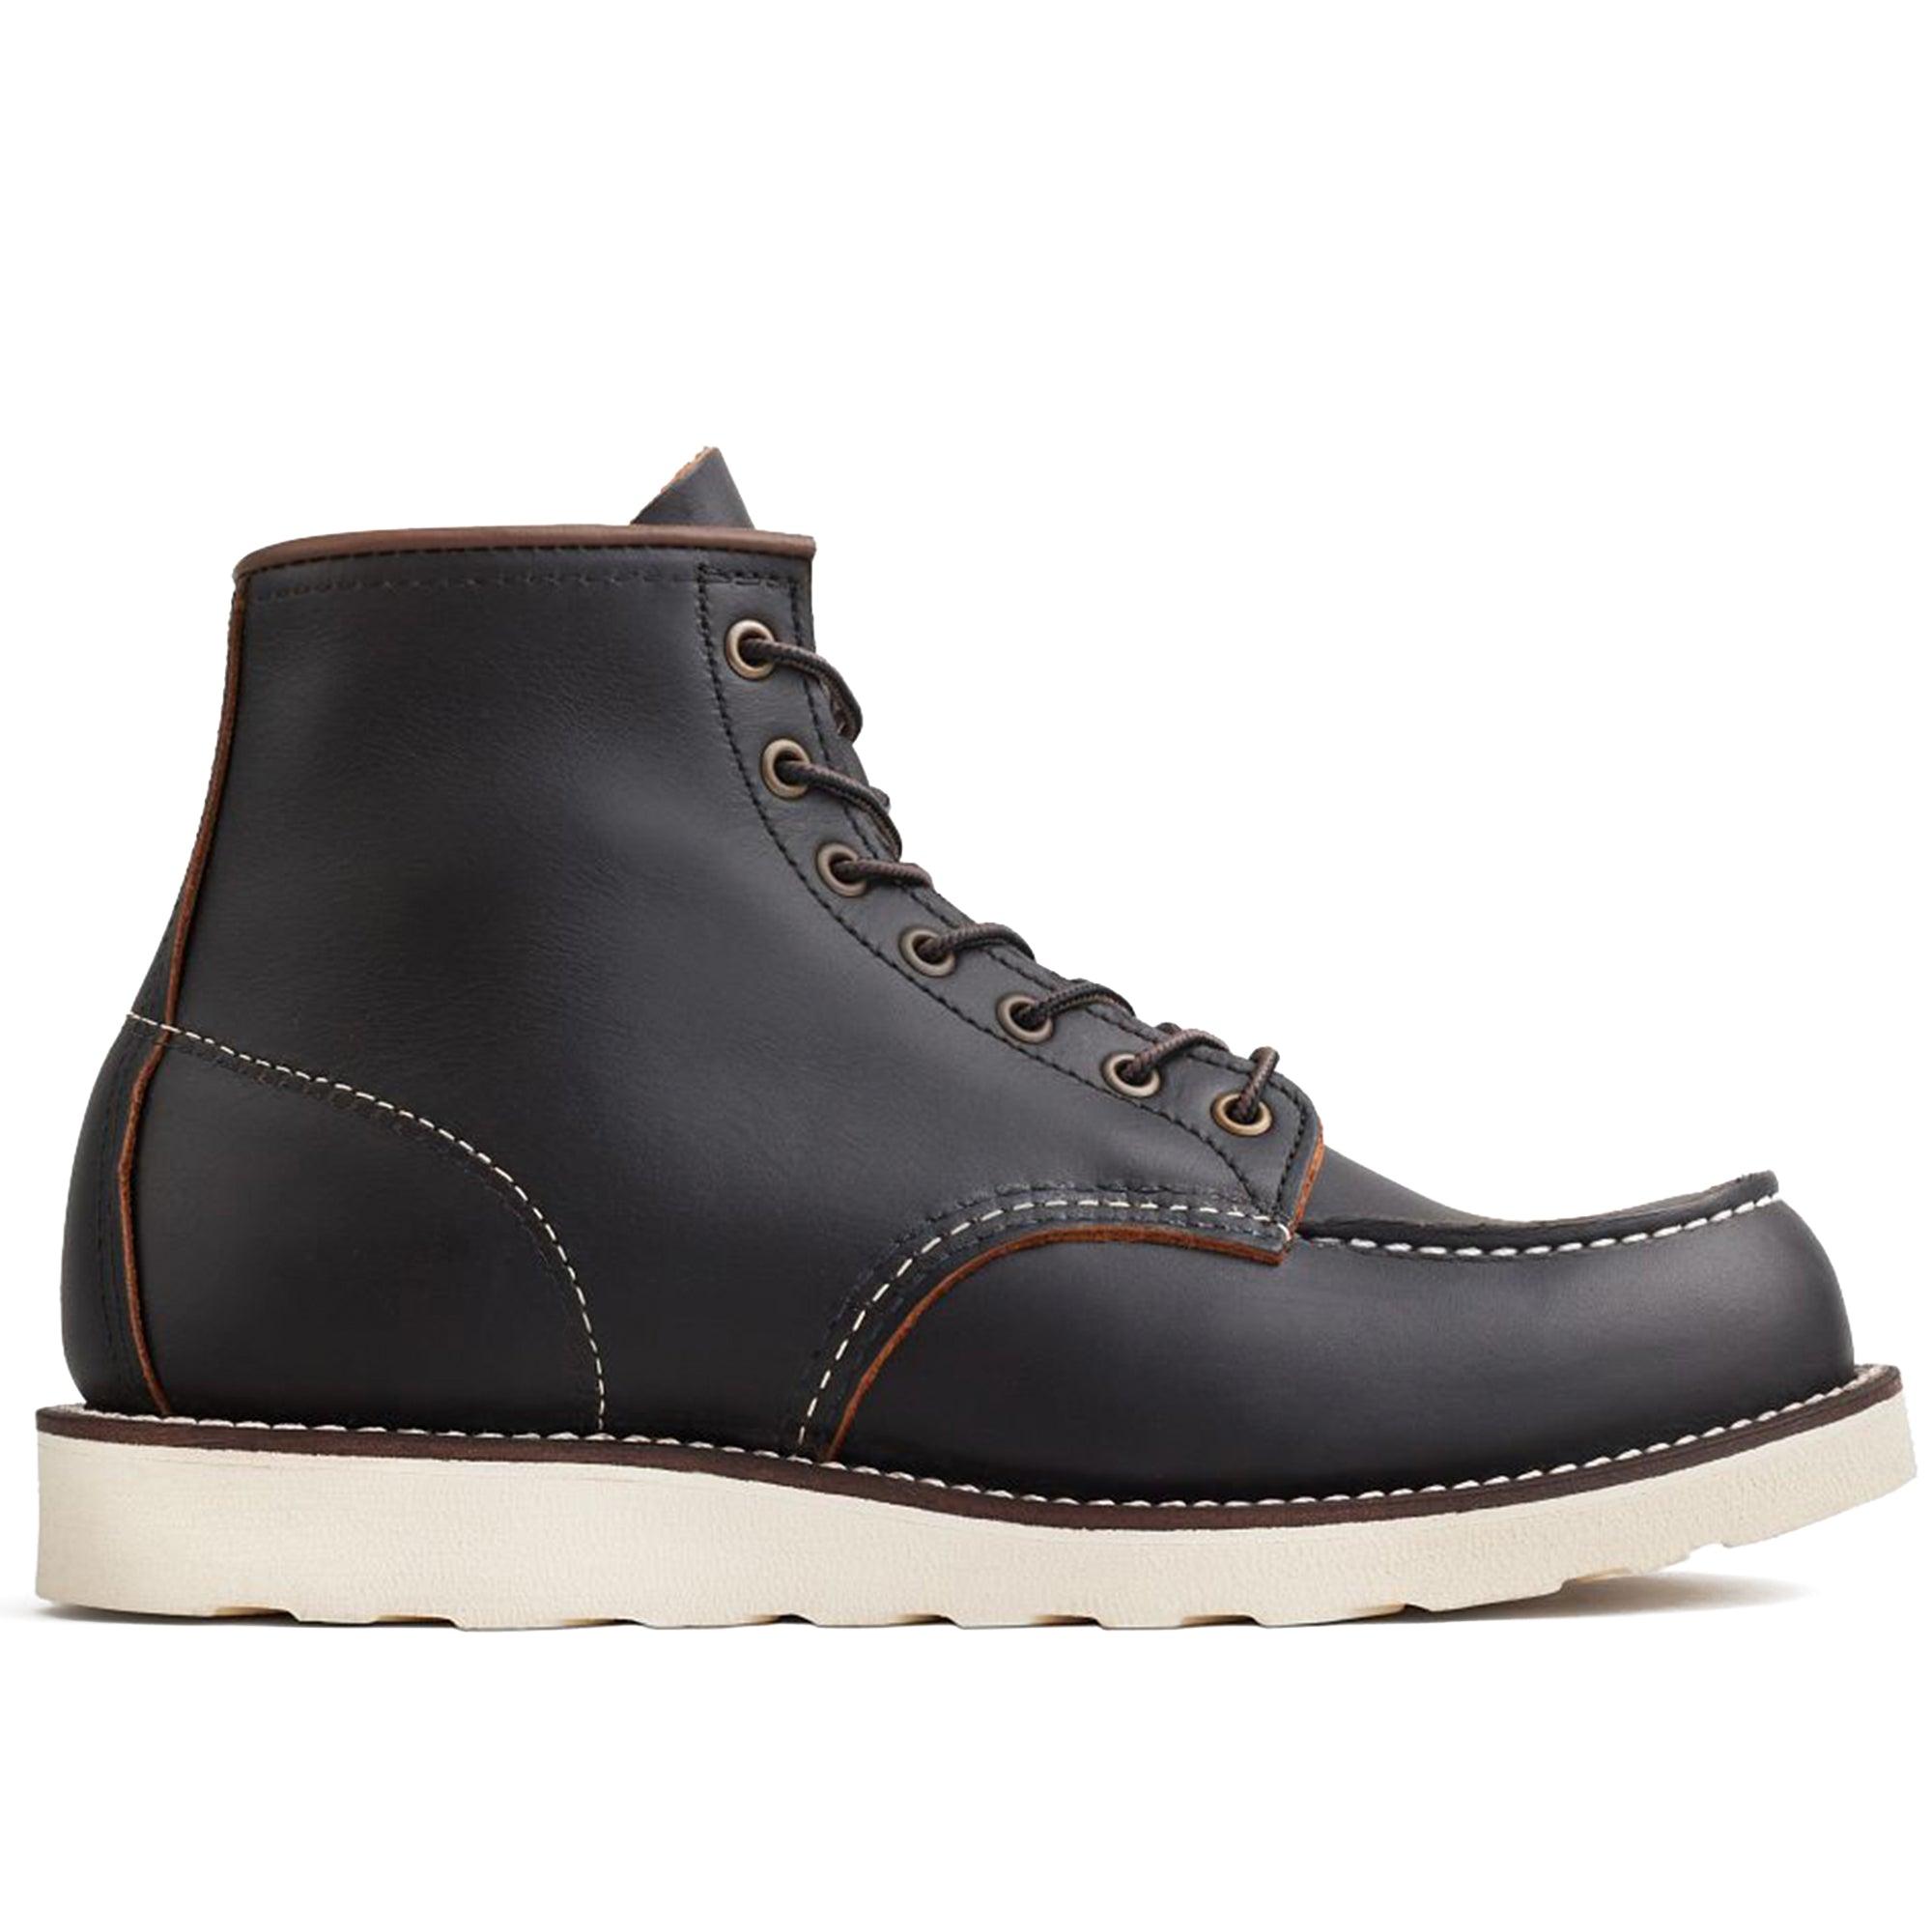 Red Wing 8849 6